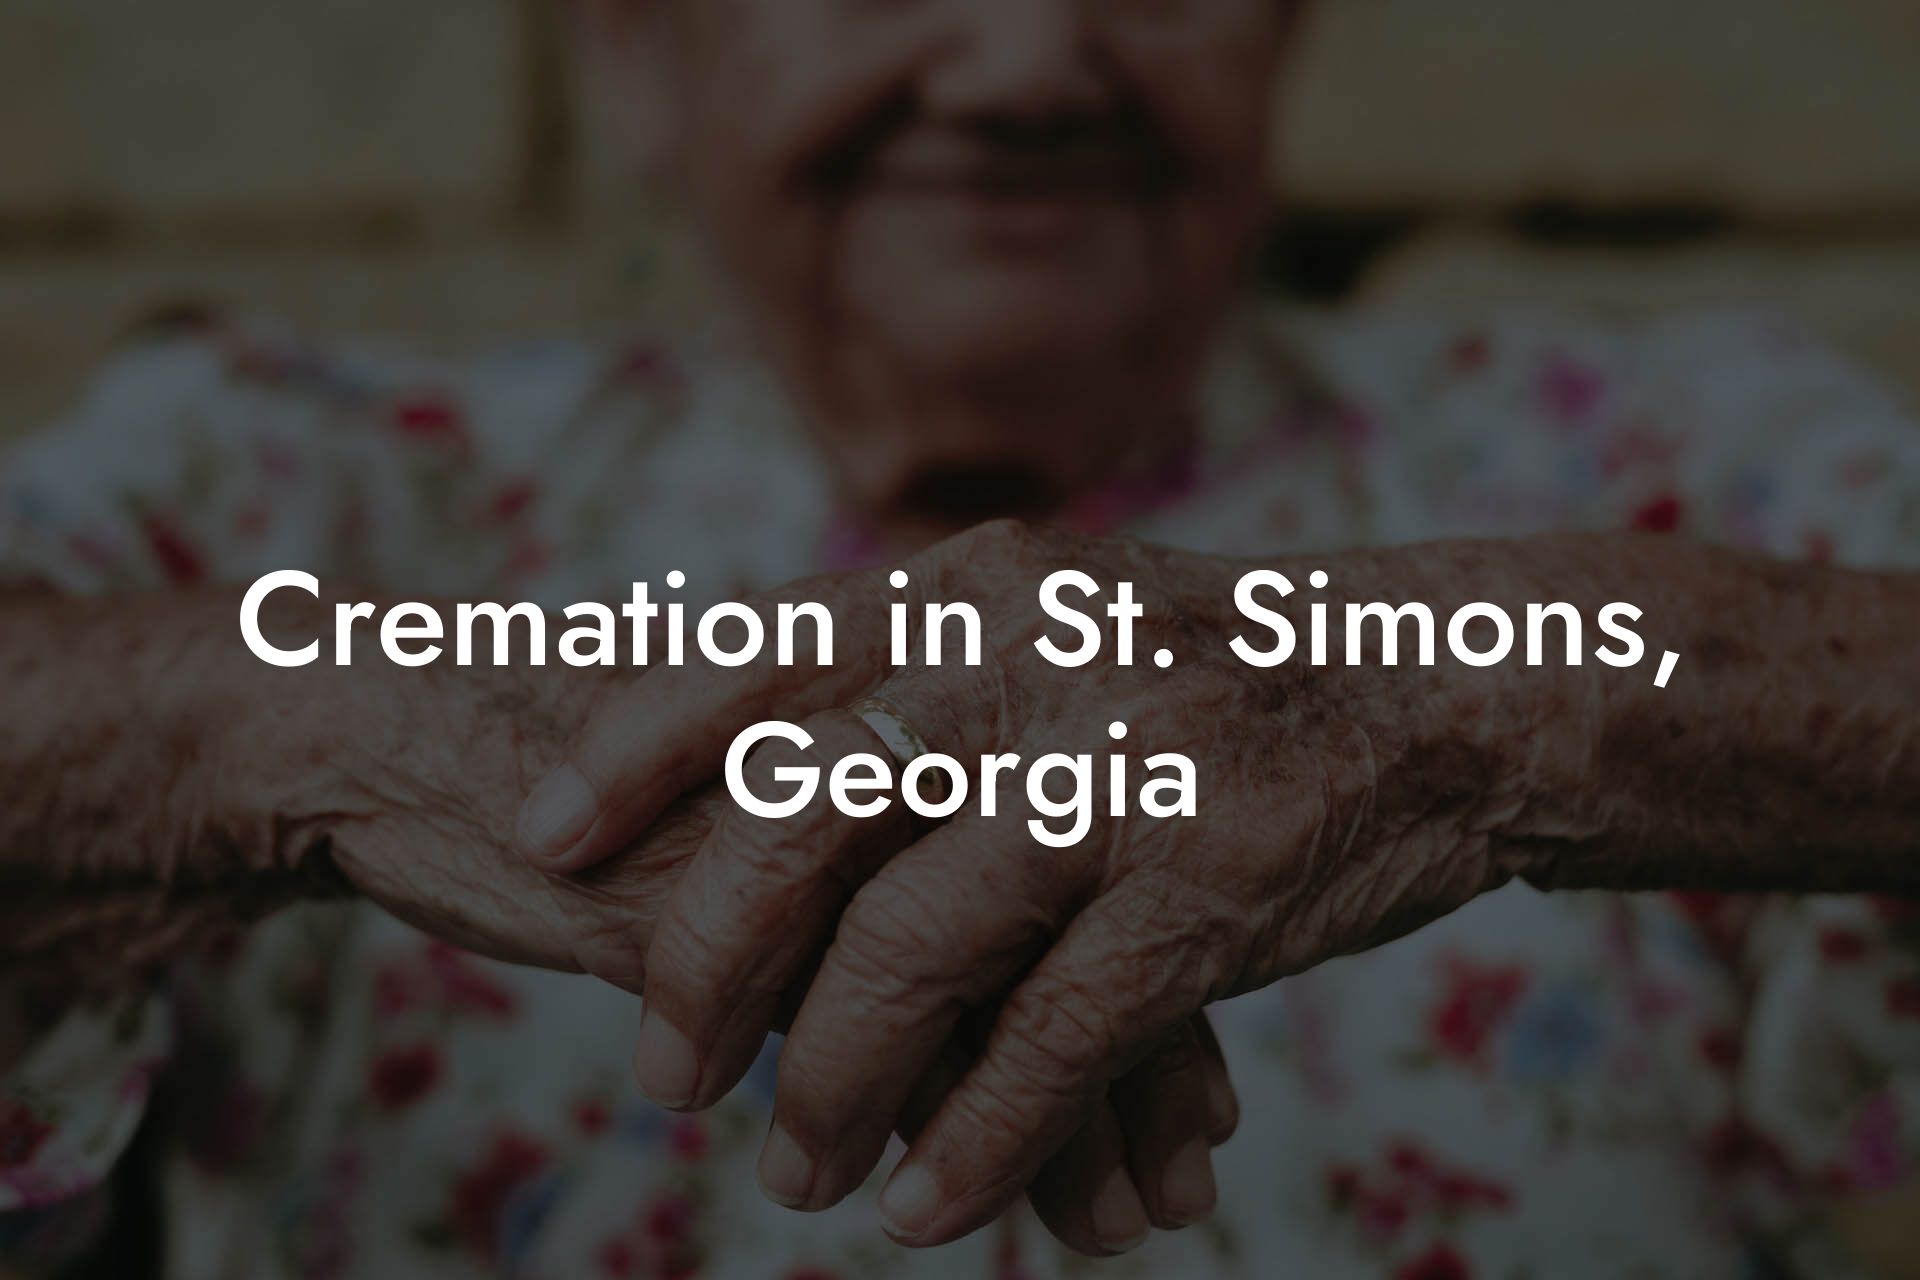 Cremation in St. Simons, Georgia